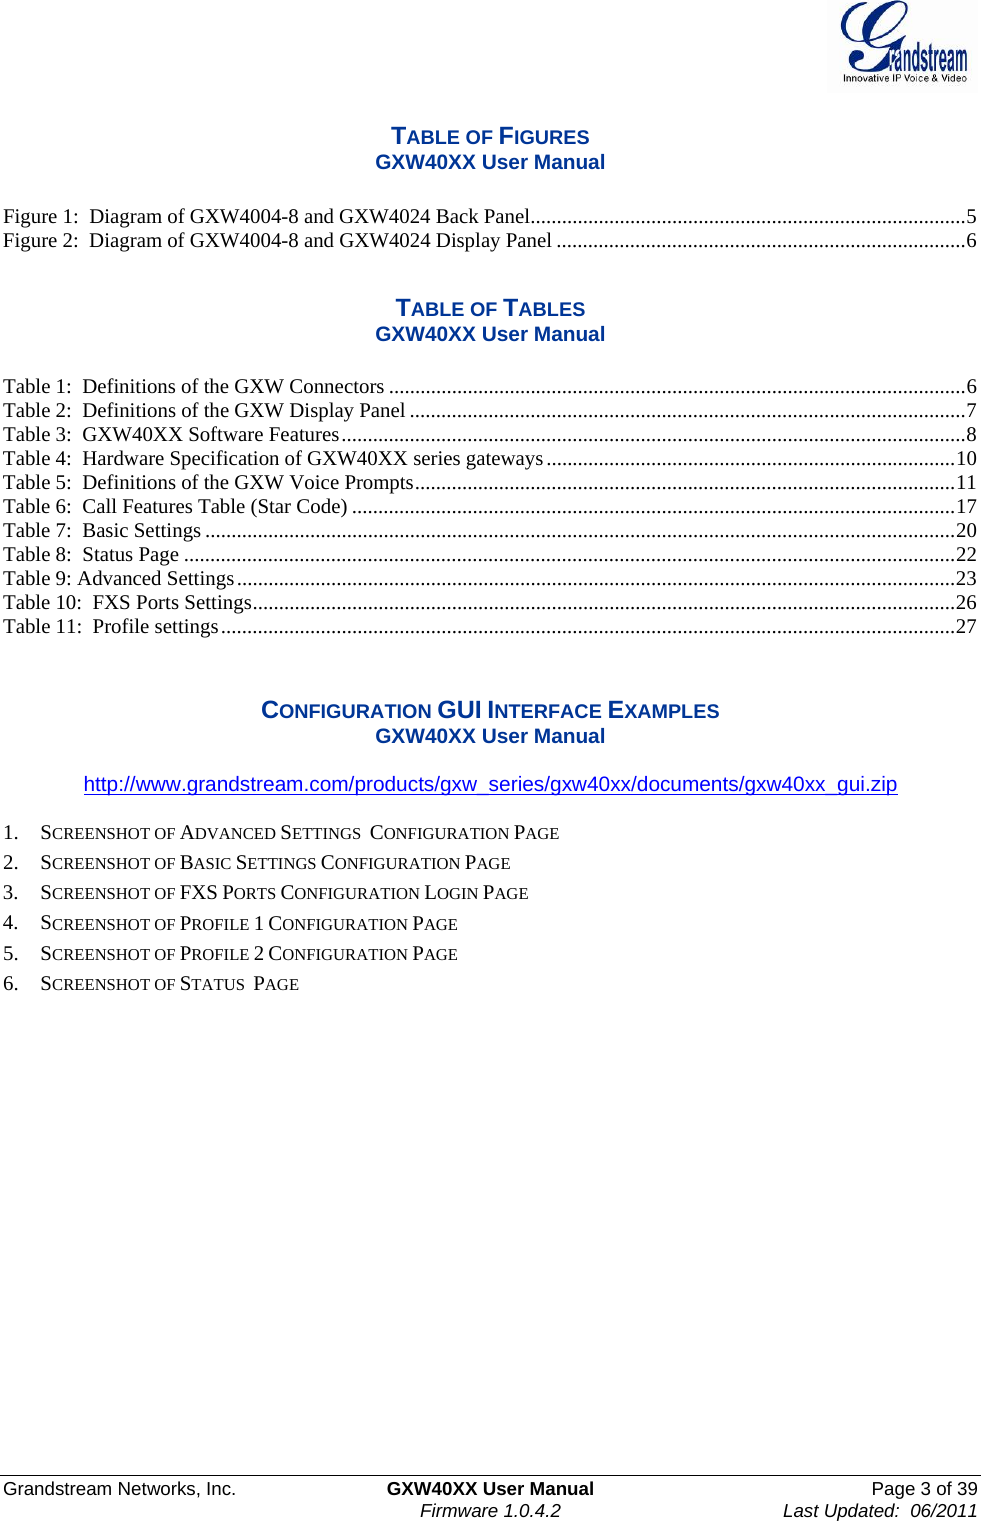  Grandstream Networks, Inc.  GXW40XX User Manual  Page 3 of 39    Firmware 1.0.4.2  Last Updated:  06/2011   TABLE OF FIGURES GXW40XX User Manual  Figure 1:  Diagram of GXW4004-8 and GXW4024 Back Panel ................................................................................... 5 Figure 2:  Diagram of GXW4004-8 and GXW4024 Display Panel .............................................................................. 6  TABLE OF TABLES GXW40XX User Manual  Table 1:  Definitions of the GXW Connectors .............................................................................................................. 6 Table 2:  Definitions of the GXW Display Panel .......................................................................................................... 7 Table 3:  GXW40XX Software Features ....................................................................................................................... 8 Table 4:  Hardware Specification of GXW40XX series gateways .............................................................................. 10 Table 5:  Definitions of the GXW Voice Prompts ....................................................................................................... 11 Table 6:  Call Features Table (Star Code) ................................................................................................................... 17 Table 7:  Basic Settings ............................................................................................................................................... 20 Table 8:  Status Page ................................................................................................................................................... 22 Table 9: Advanced Settings ......................................................................................................................................... 23 Table 10:  FXS Ports Settings ...................................................................................................................................... 26 Table 11:  Profile settings ............................................................................................................................................ 27   CONFIGURATION GUI INTERFACE EXAMPLES GXW40XX User Manual  http://www.grandstream.com/products/gxw_series/gxw40xx/documents/gxw40xx_gui.zip   1. SCREENSHOT OF ADVANCED SETTINGS  CONFIGURATION PAGE  2. SCREENSHOT OF BASIC SETTINGS CONFIGURATION PAGE  3. SCREENSHOT OF FXS PORTS CONFIGURATION LOGIN PAGE 4. SCREENSHOT OF PROFILE 1 CONFIGURATION PAGE 5. SCREENSHOT OF PROFILE 2 CONFIGURATION PAGE 6. SCREENSHOT OF STATUS  PAGE 